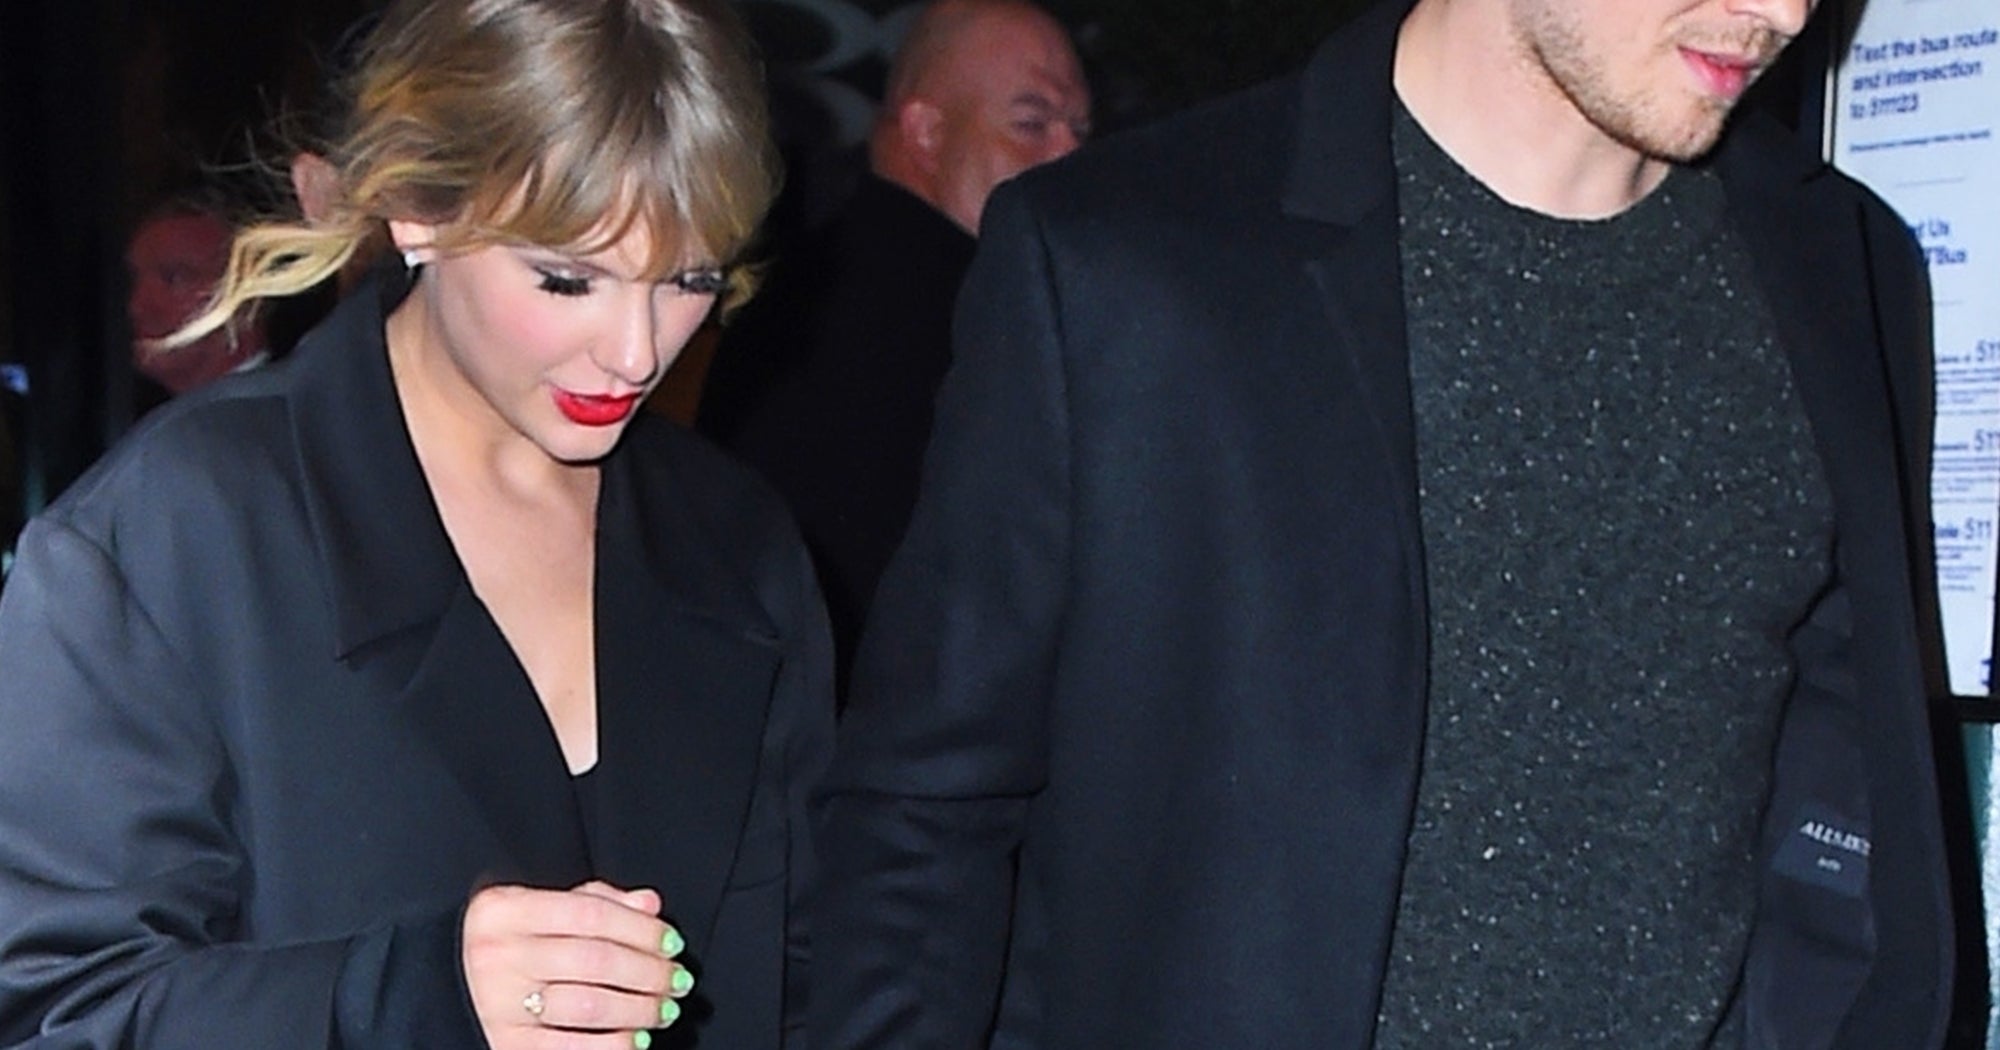 Taylor Swift Lime Green Nails Stole The Show At Snl